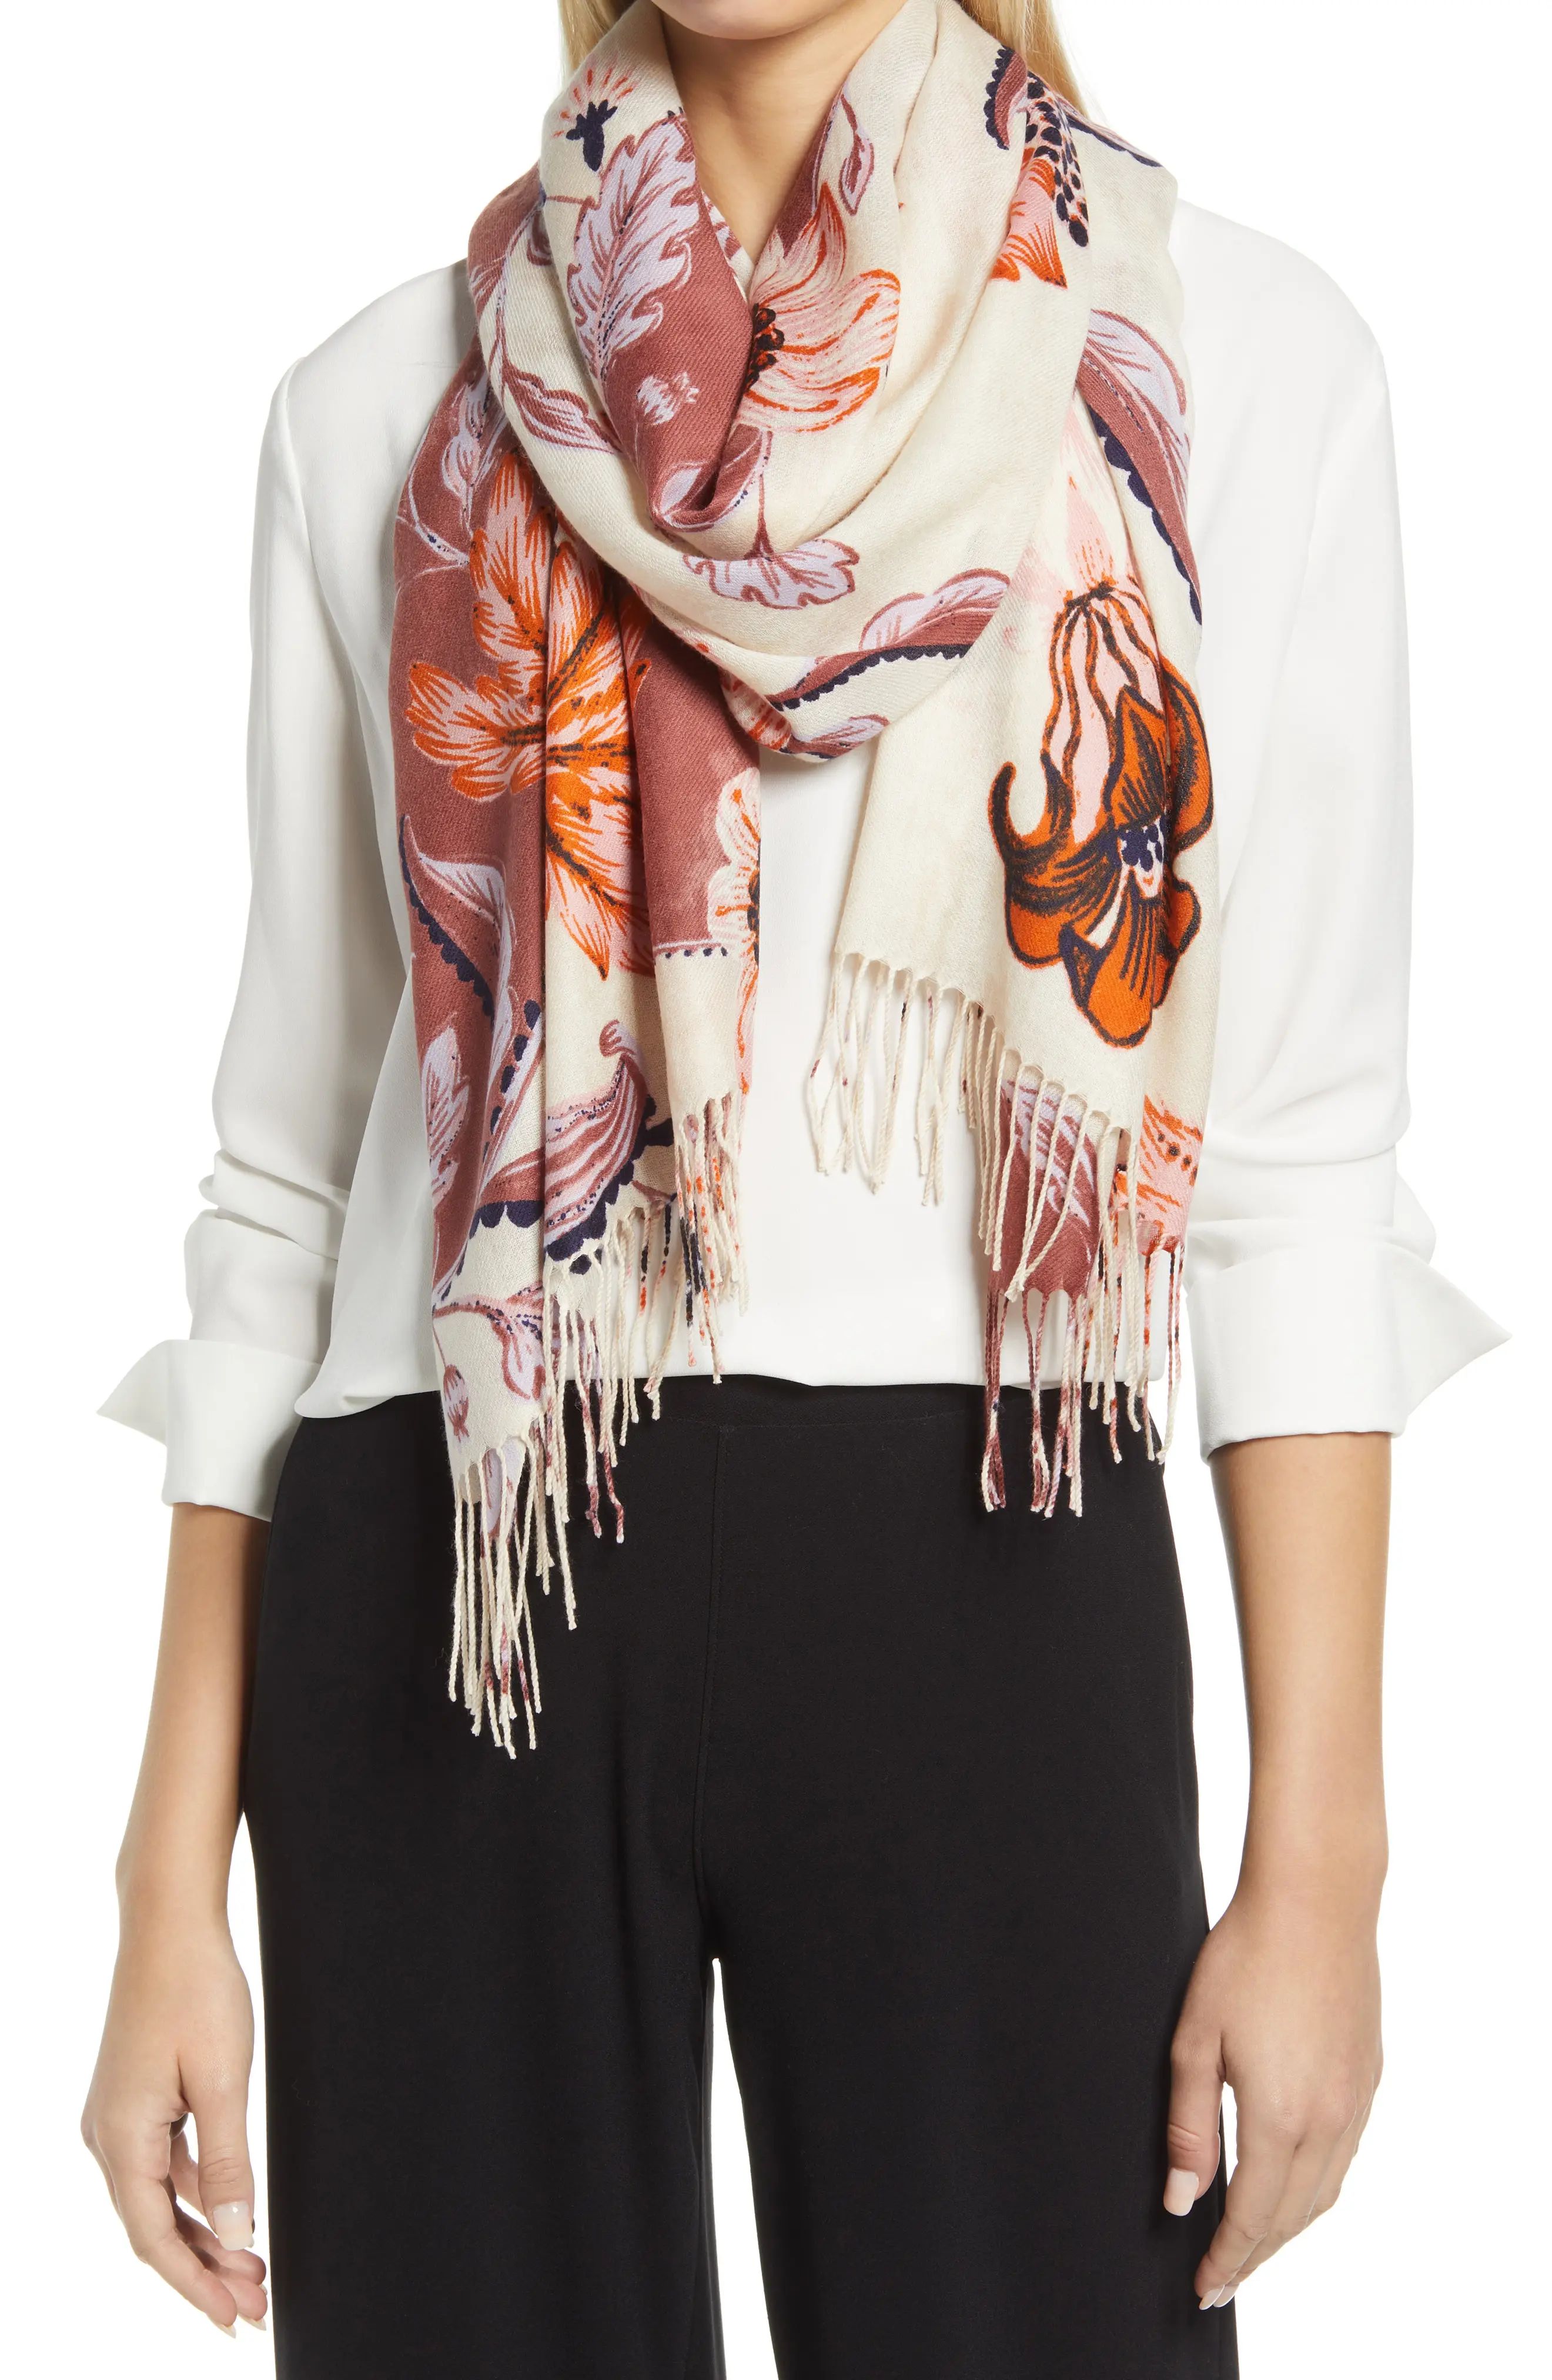 Nordstrom Tissue Print Wool & Cashmere Wrap Scarf in Red Jelly Juliets Garden at Nordstrom | Nordstrom